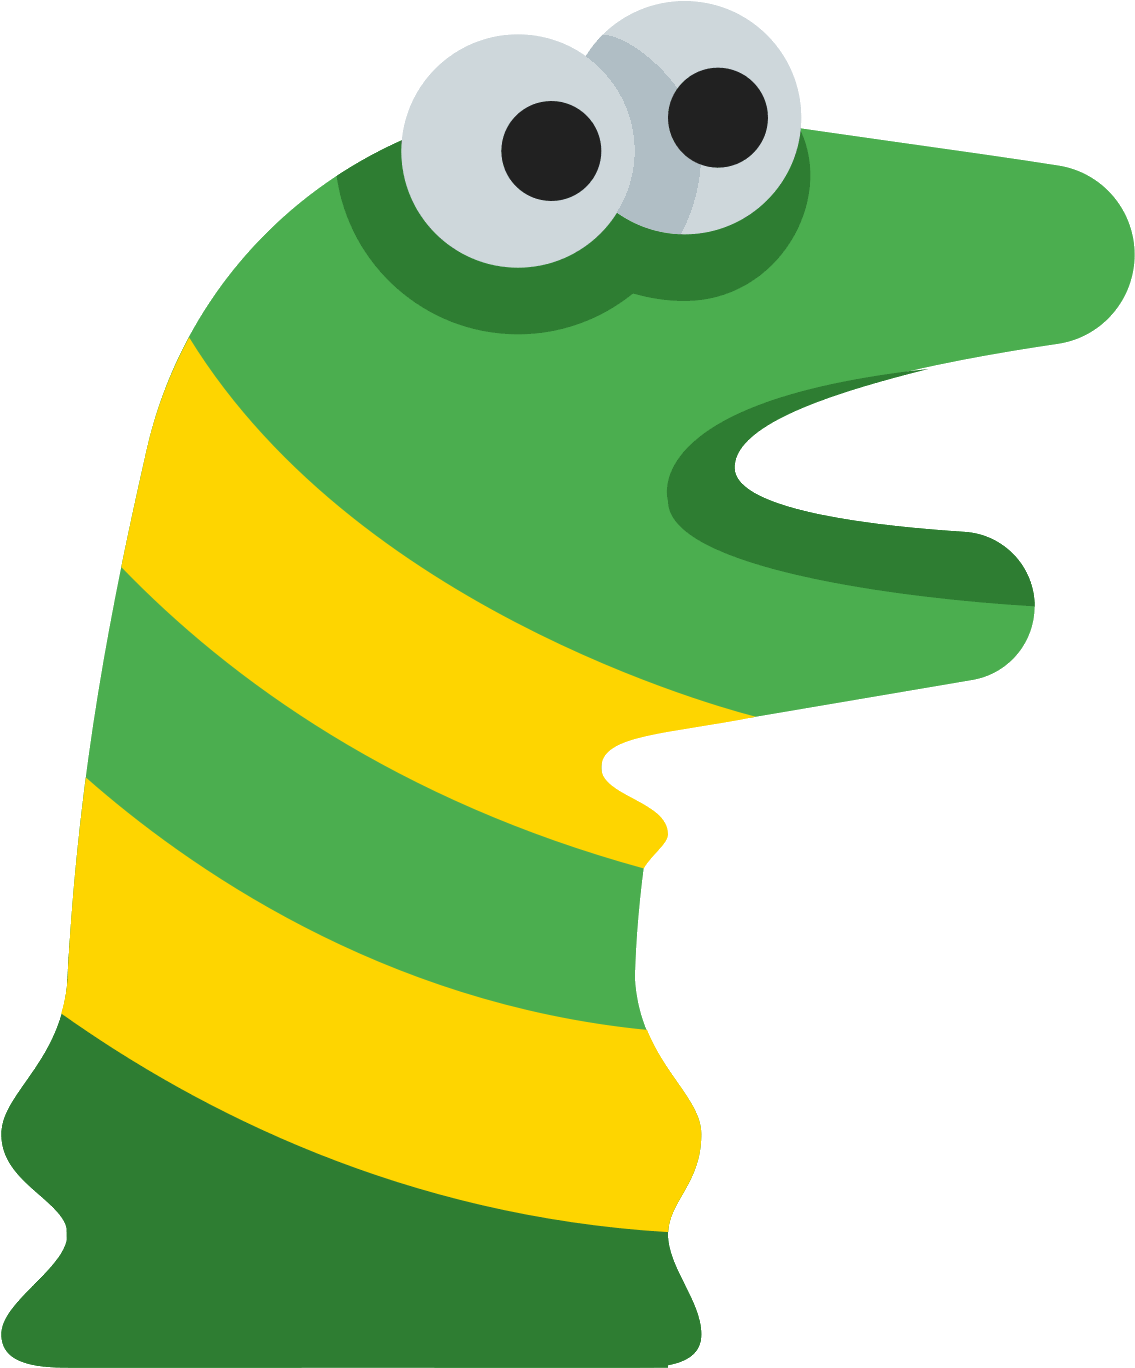 A Cartoon Of A Green And Yellow Striped Toy